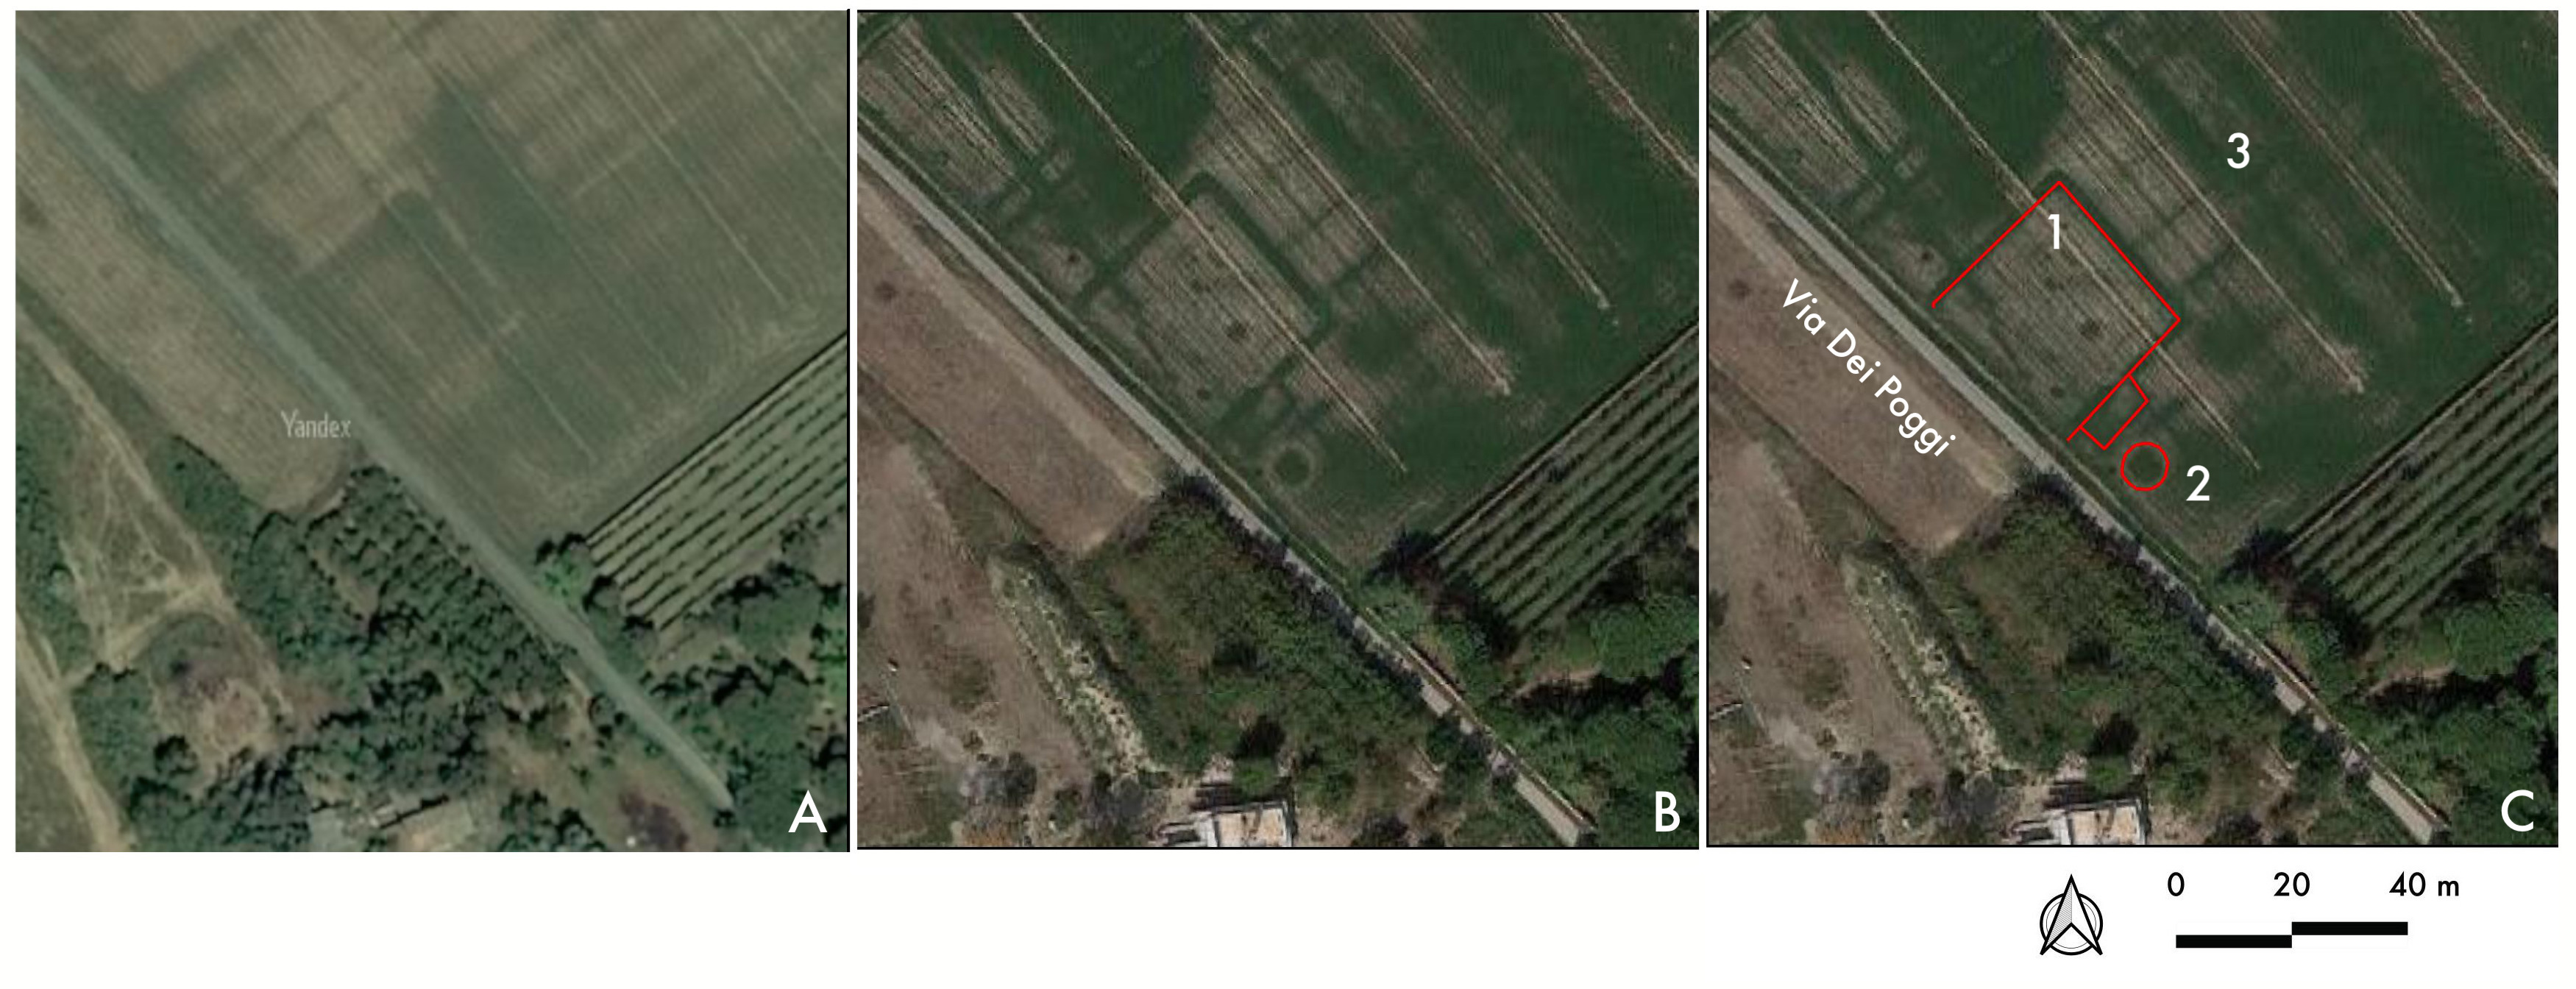  Figure 3. Southern suburb of Ravenna, area north of Fiumi Uniti and near Via dei Poggi: A: site seen on Yandex imagery 2021; B: same site seen on Google Earth 2021; C: possible structural anomalies highlighted: square-shaped structural anomaly (no. 1); circular feature (no. 2); field divisions (no. 3). Author M. Cavalazzi. 